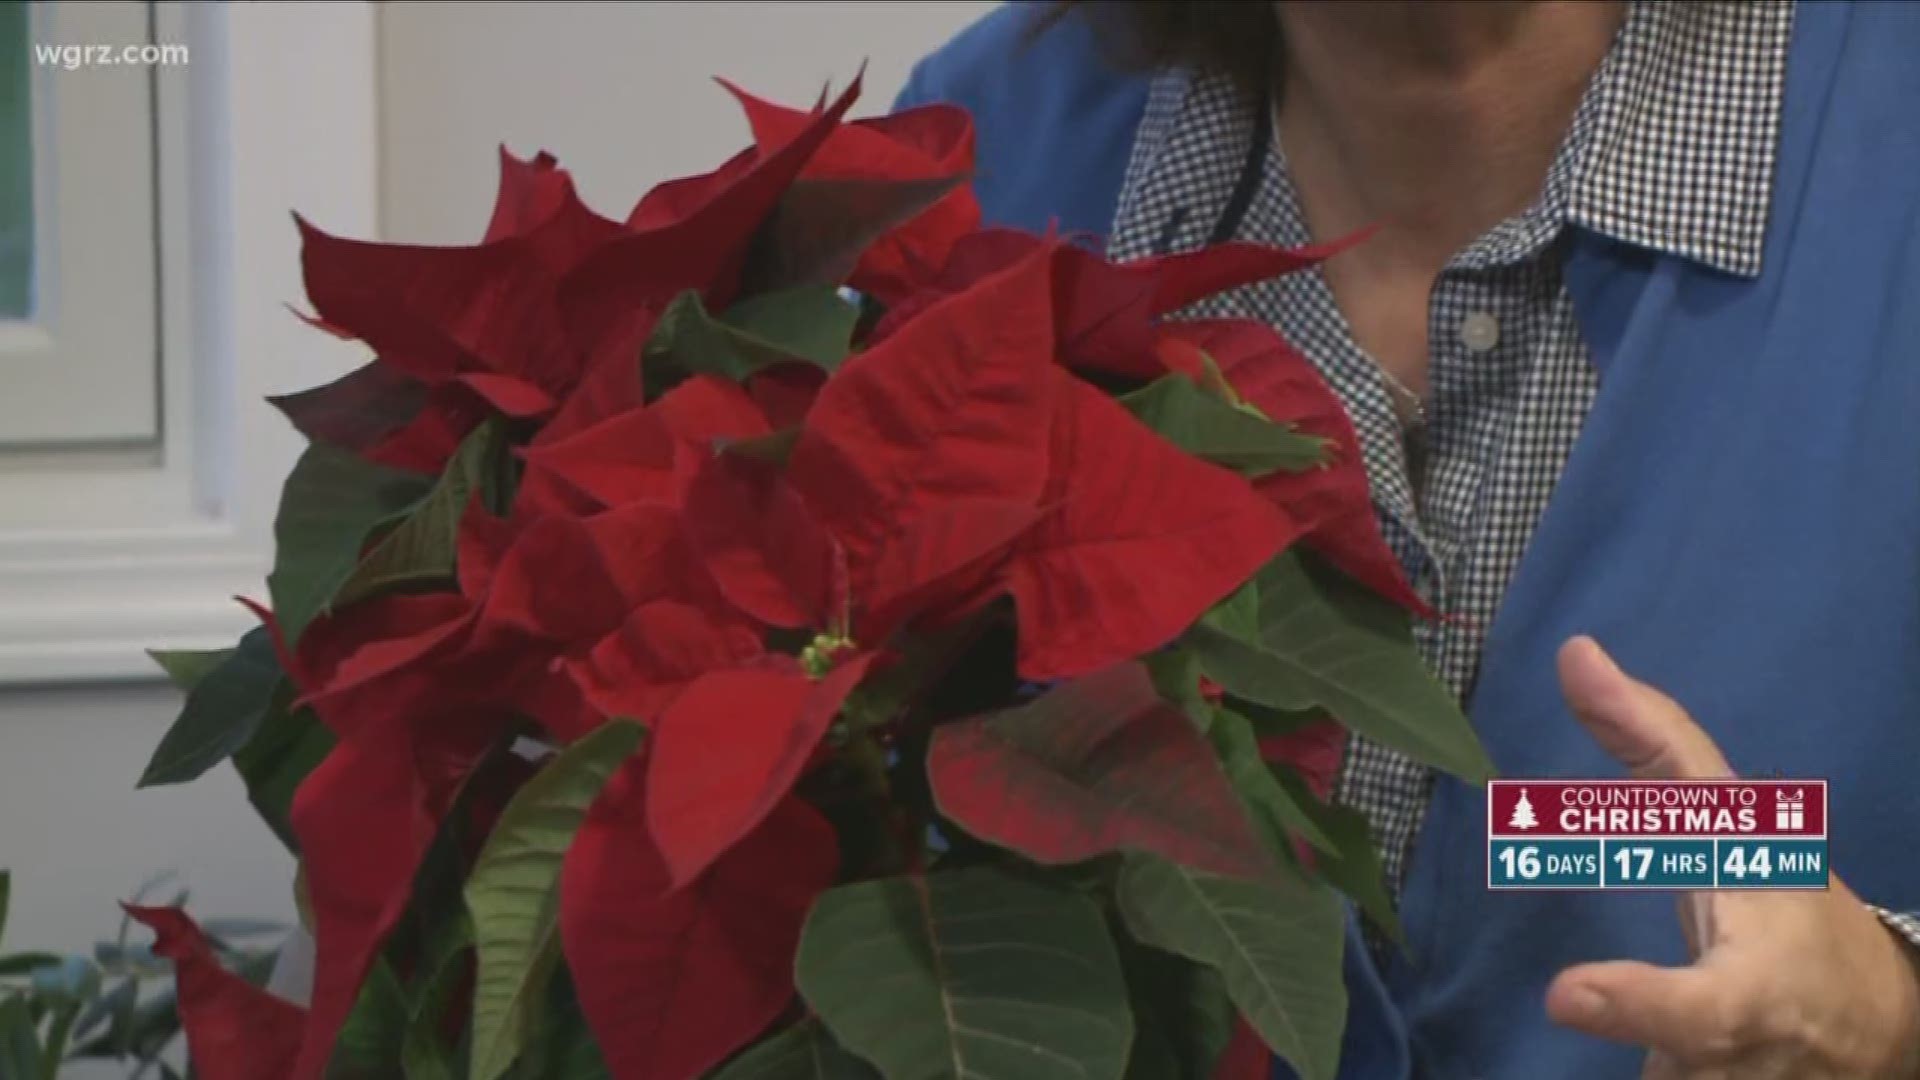 Poinsettias are a popular holiday plant that can stay beautiful for a long time if you care for them properly.